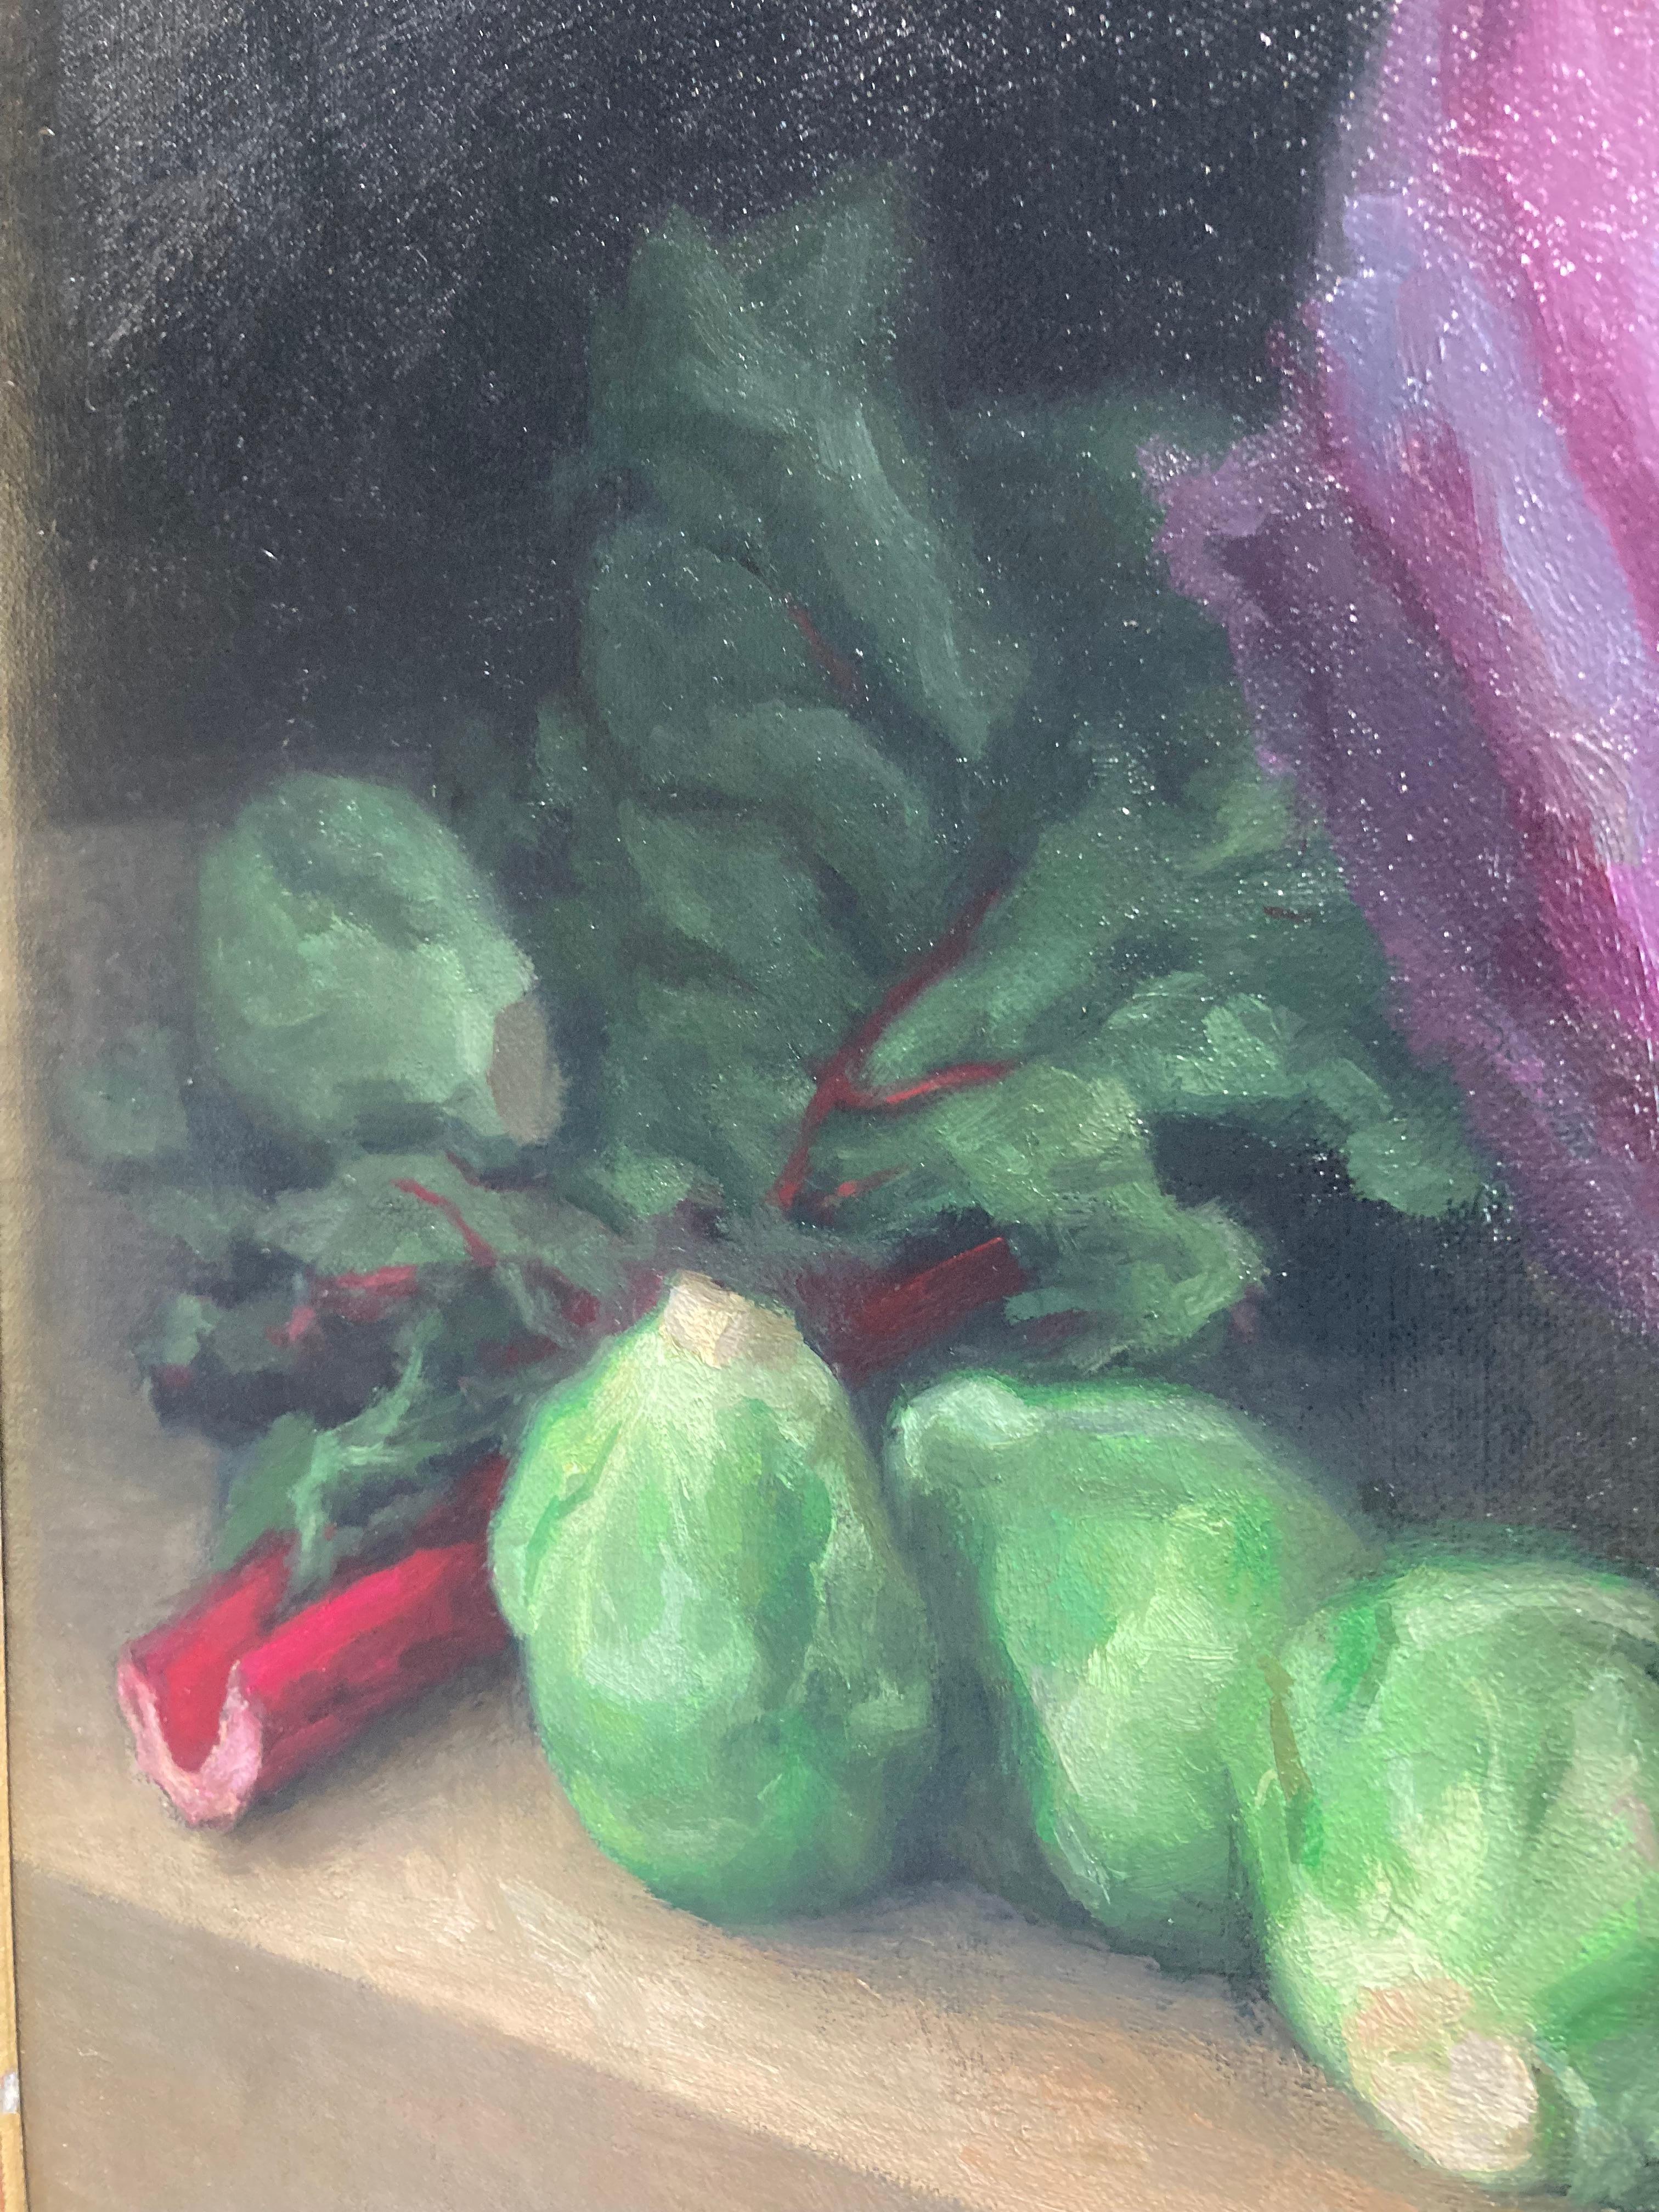 American realist painter Steven Levin expertly renders the textures of green vegetables and the wood table they rest on. Levin uses chiaroscuro to dramatize this simple scene of cabbages and chard.  Leafy greens, purple cabbage, red chard stems,